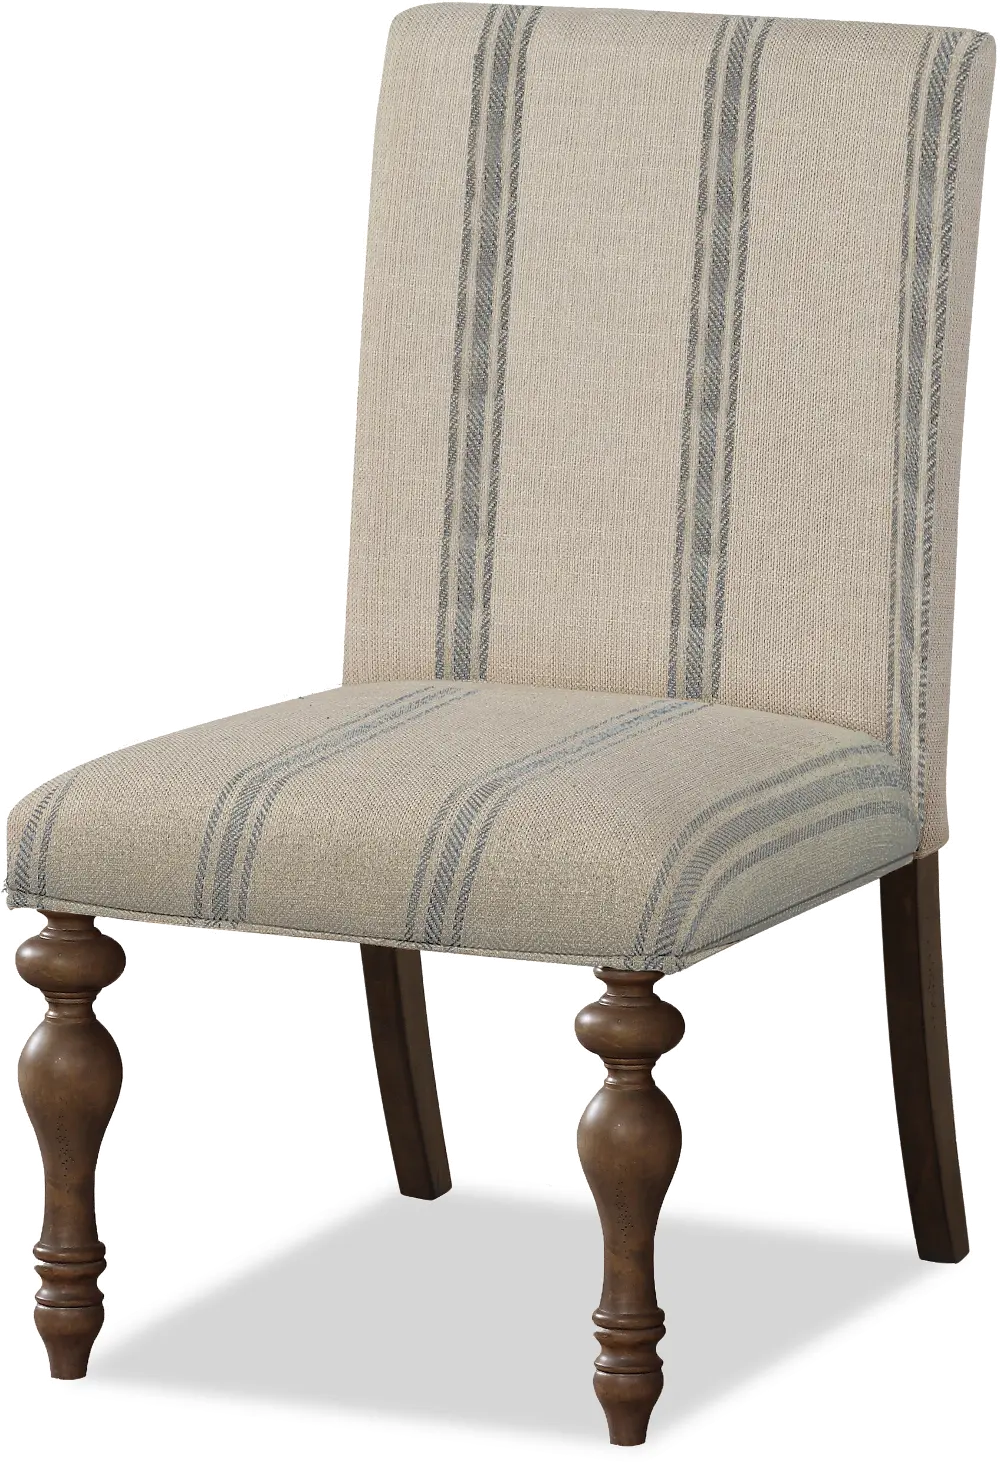 Cottage Cream and Blue Striped Upholstered Dining Chair - Laurel Grove-1